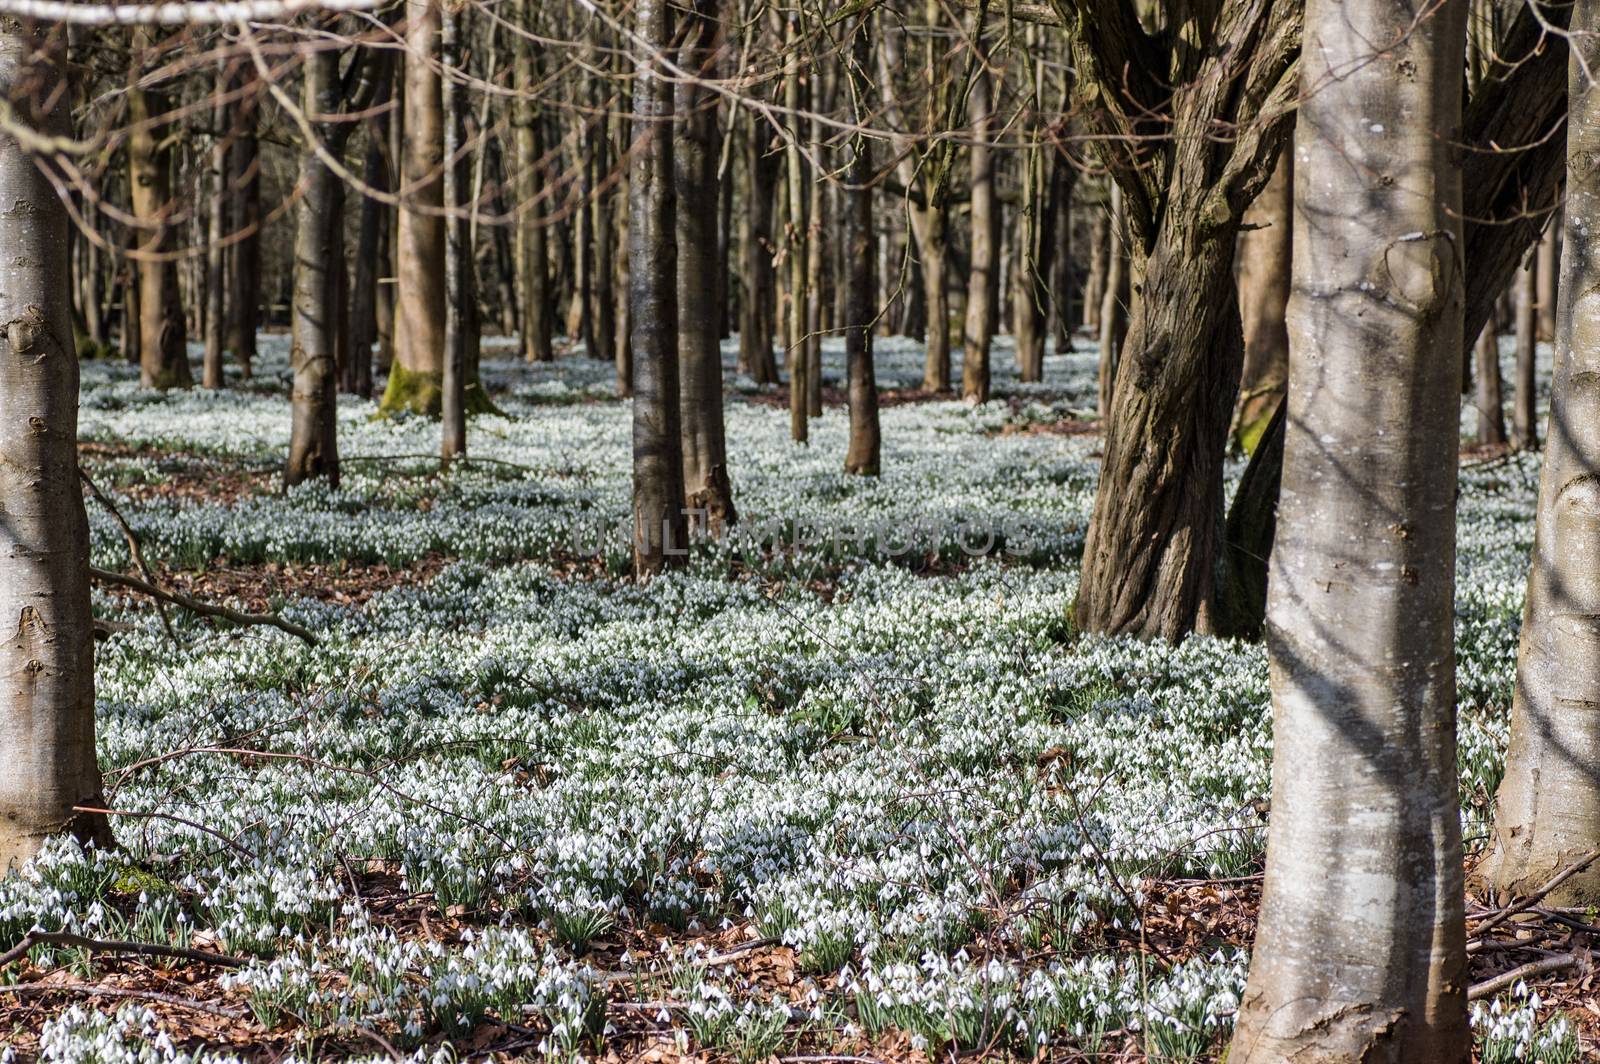 Snowdrops in woodland by BasPhoto